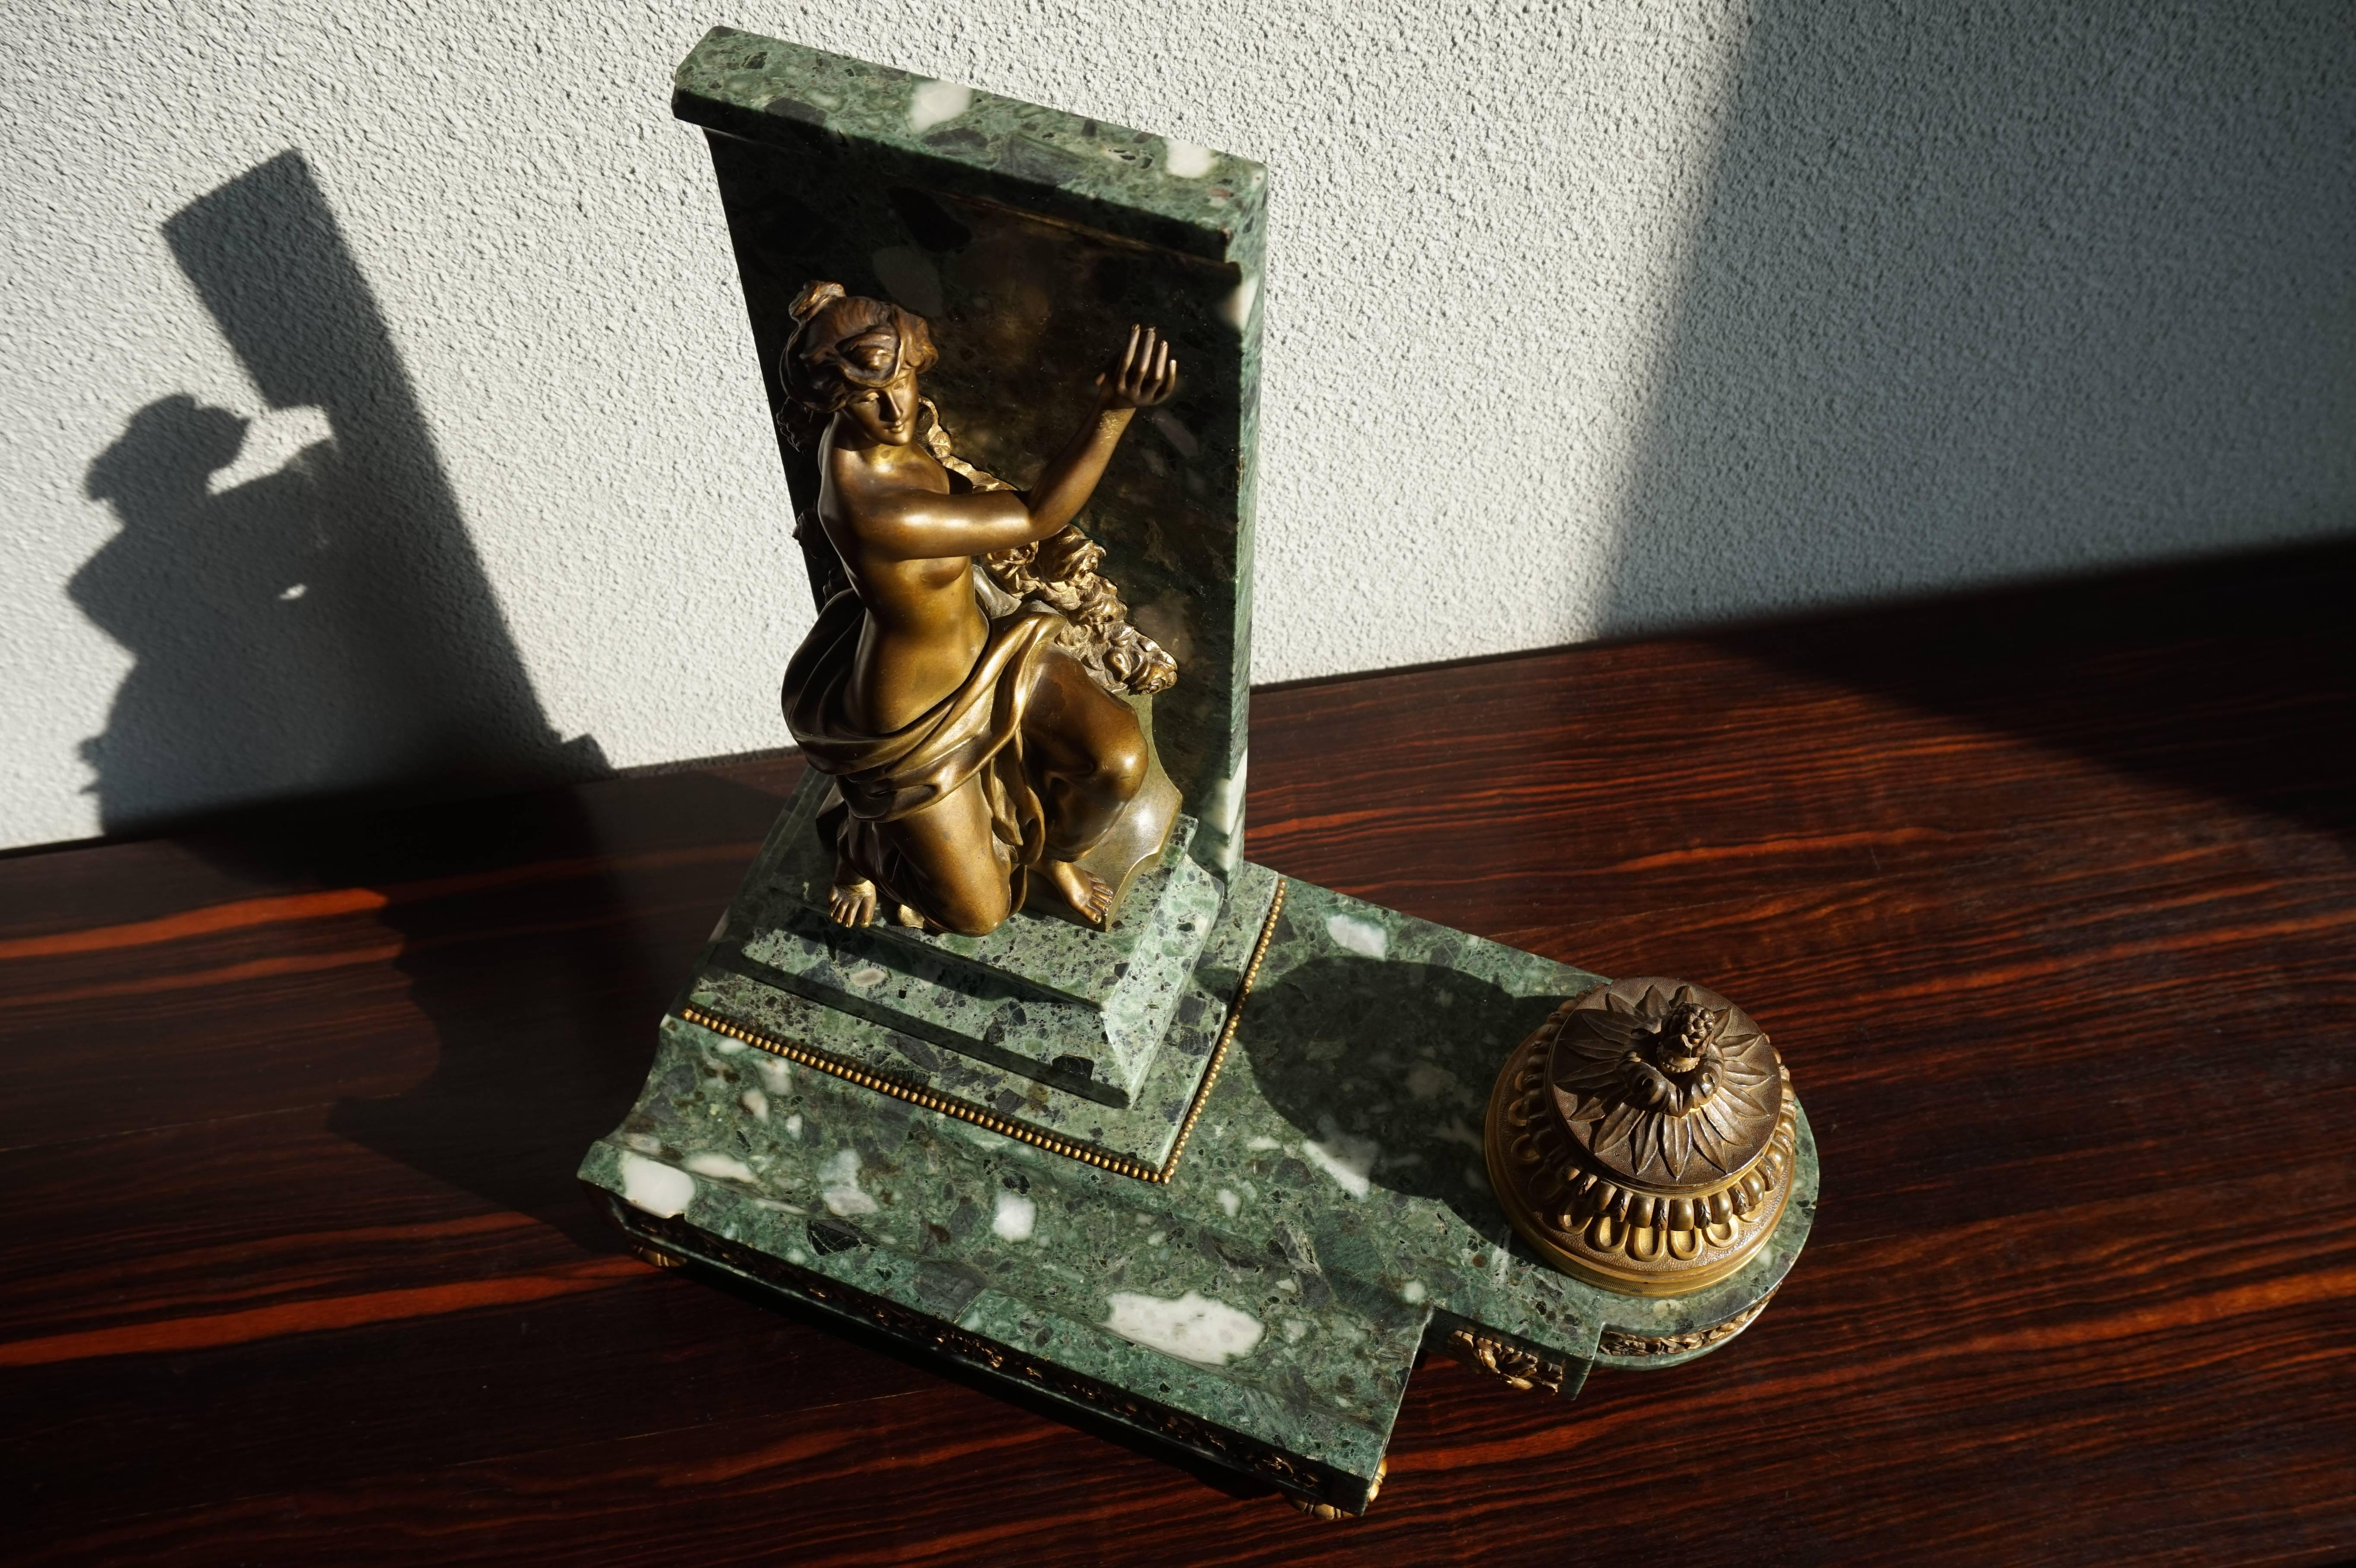 Rare and important French Napoleonic ink stand with female sculpture.

This hand-crafted and sizable ink stand of marble and gilt bronze is signed by the renowned French sculptor Marcel Debut (Paris, 1865-1933). The perfect anatomy and stunning